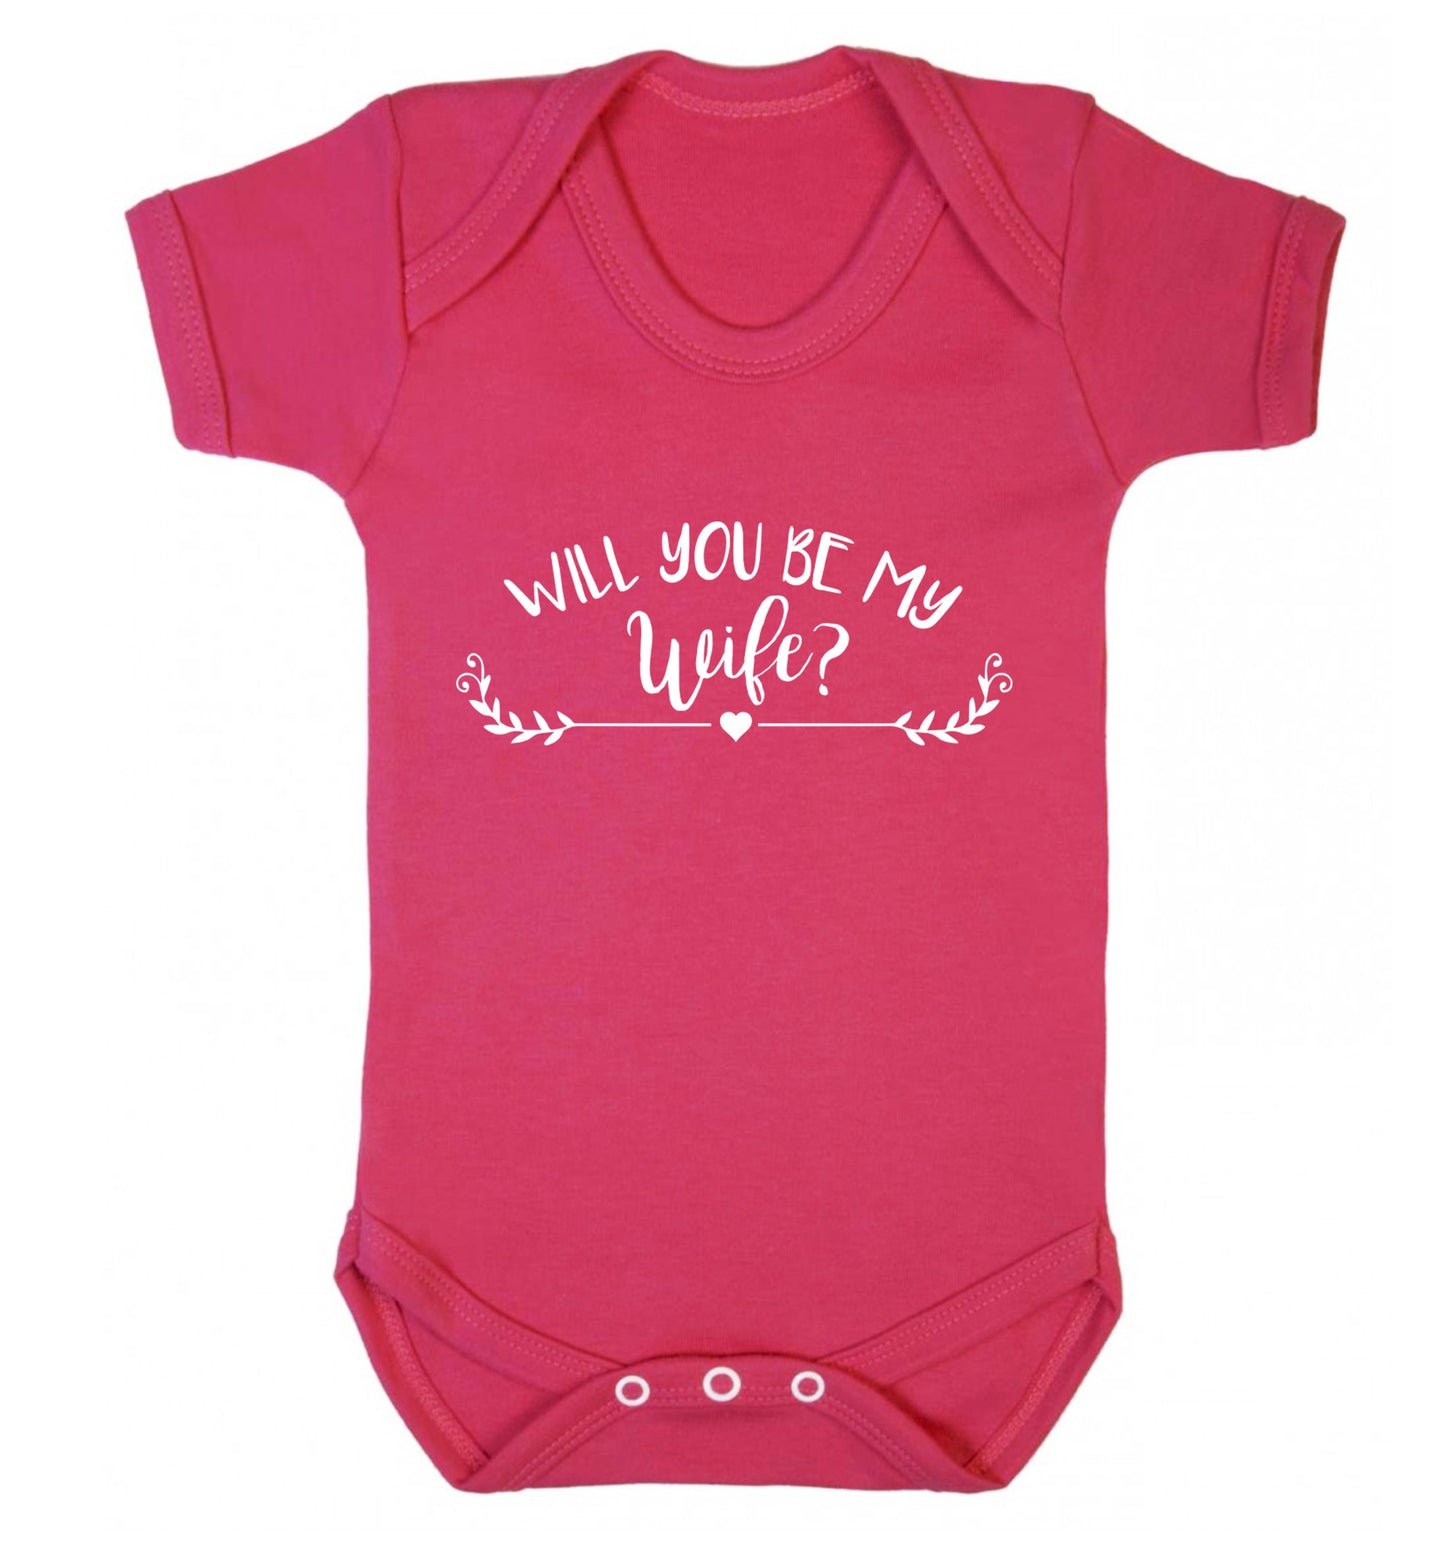 Will you be my wife? Baby Vest dark pink 18-24 months